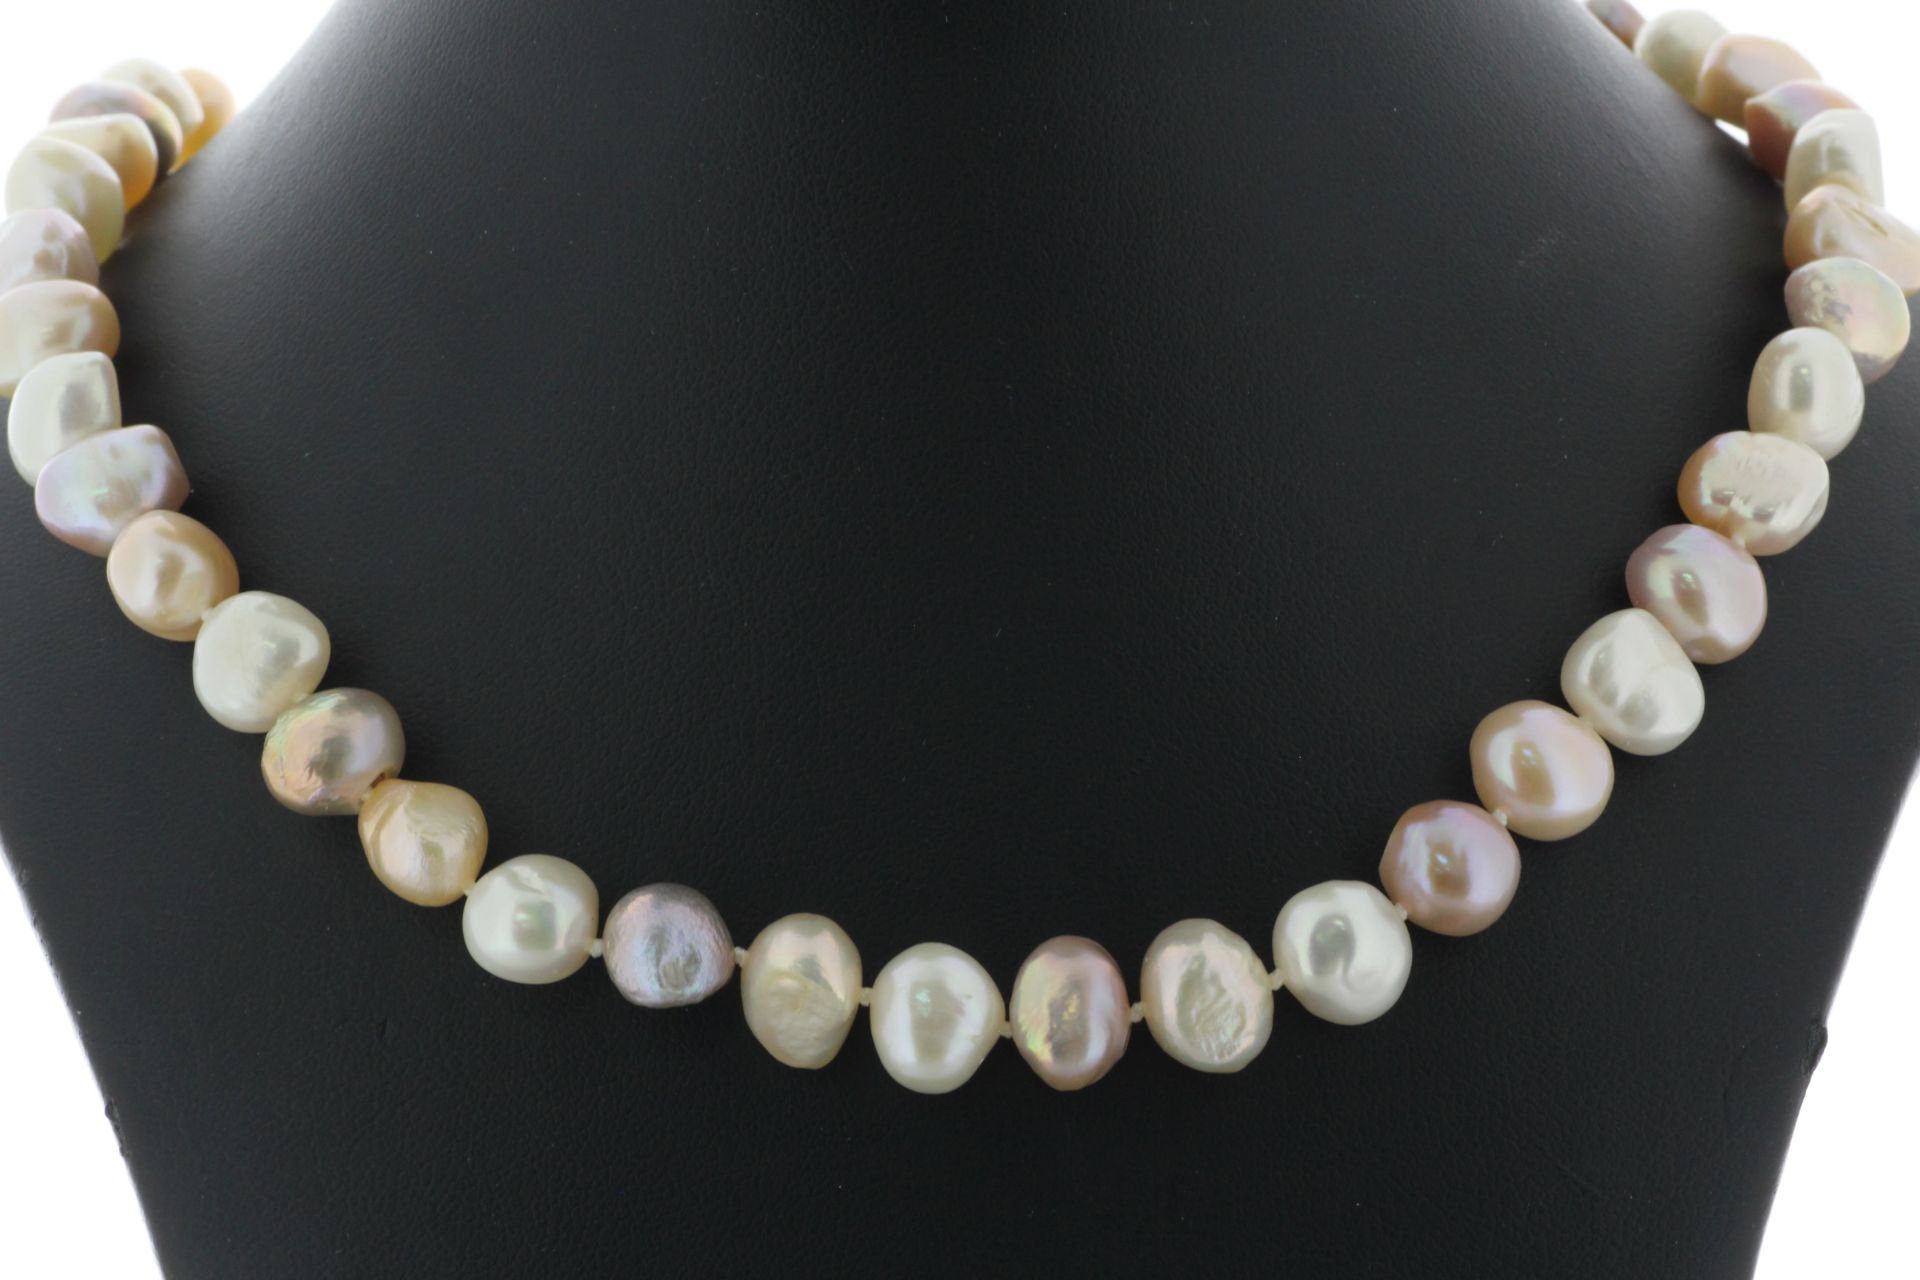 18 inch Baroque Shaped Freshwater Cultured 8.0 - 8.5mm Pearl Necklace With Brass Clasp - Image 3 of 4